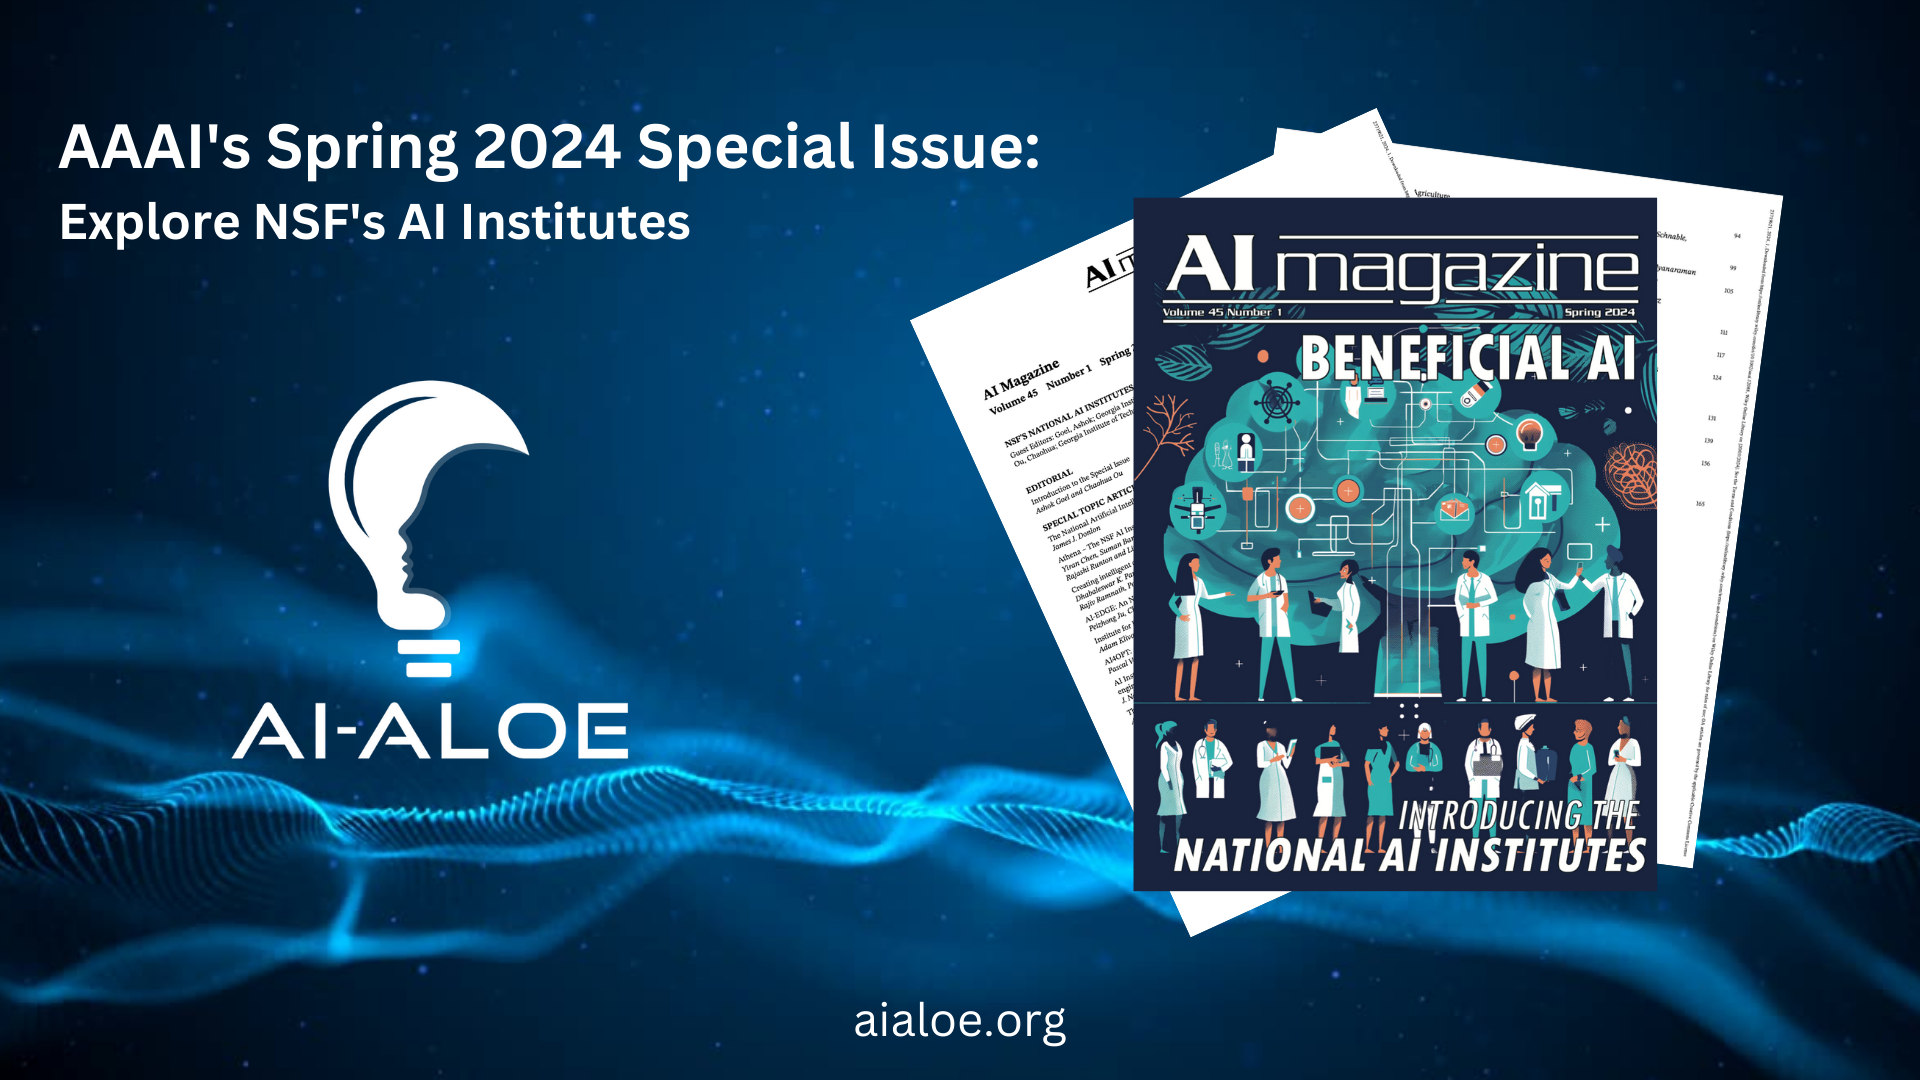 AAAI's Spring 2024 Special Issue NSF's AI Institutes Edition